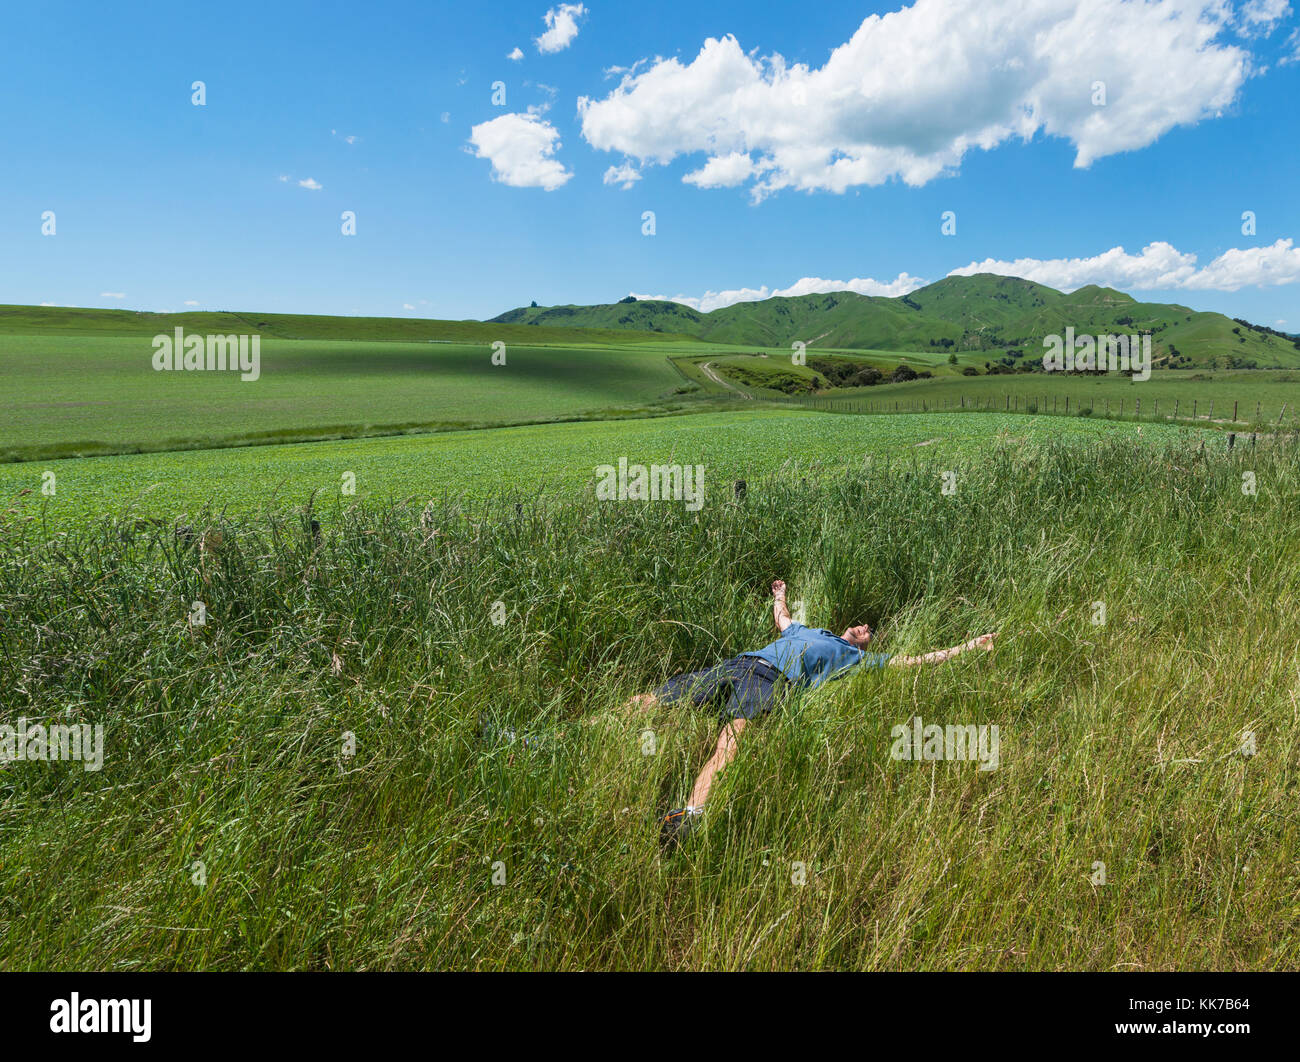 A man sprawled out in a sunny field of tall grass Stock Photo